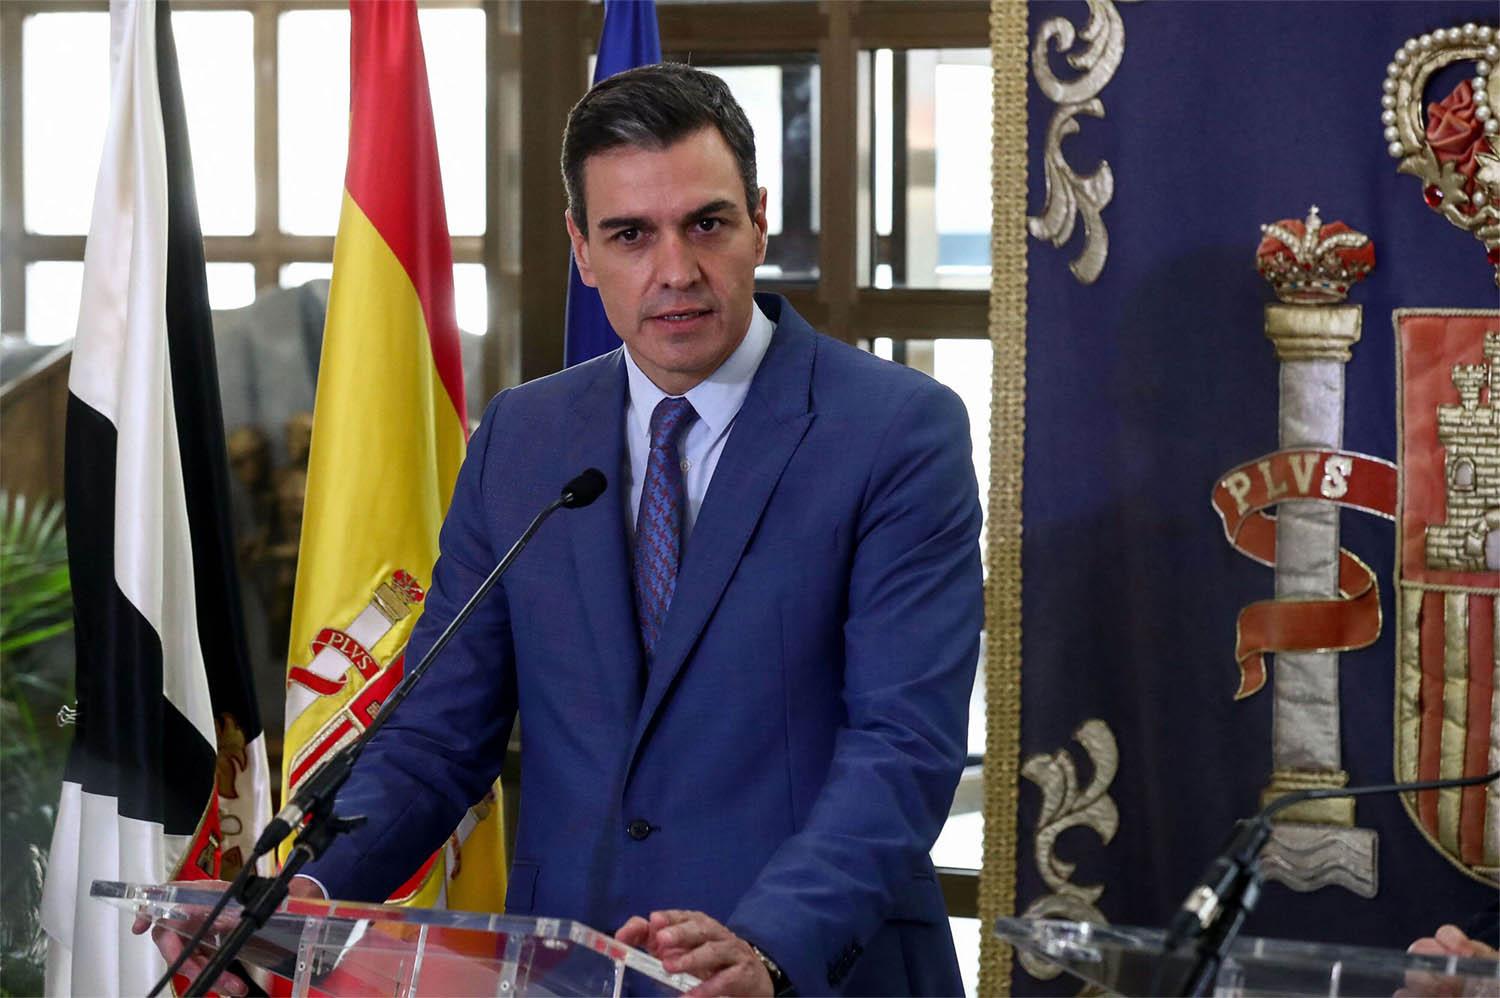 A positive step from Spanish PM to mend strained ties with Morocco